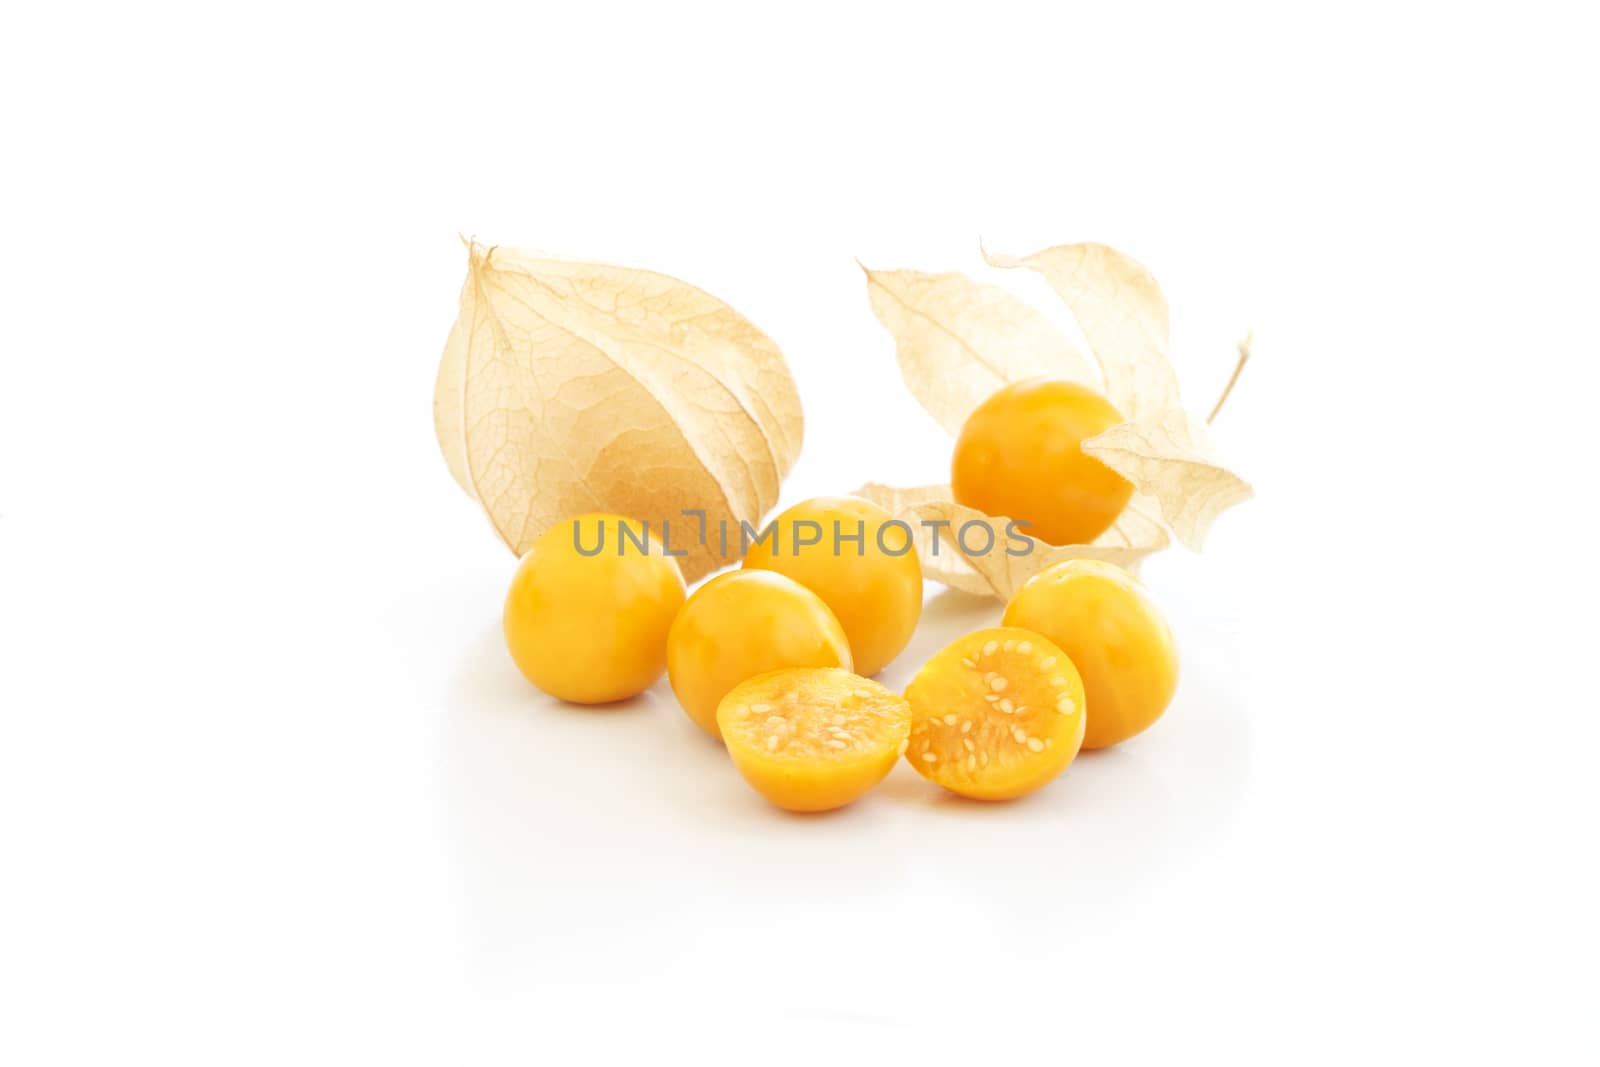 Cape gooseberry (physalis) over a white background